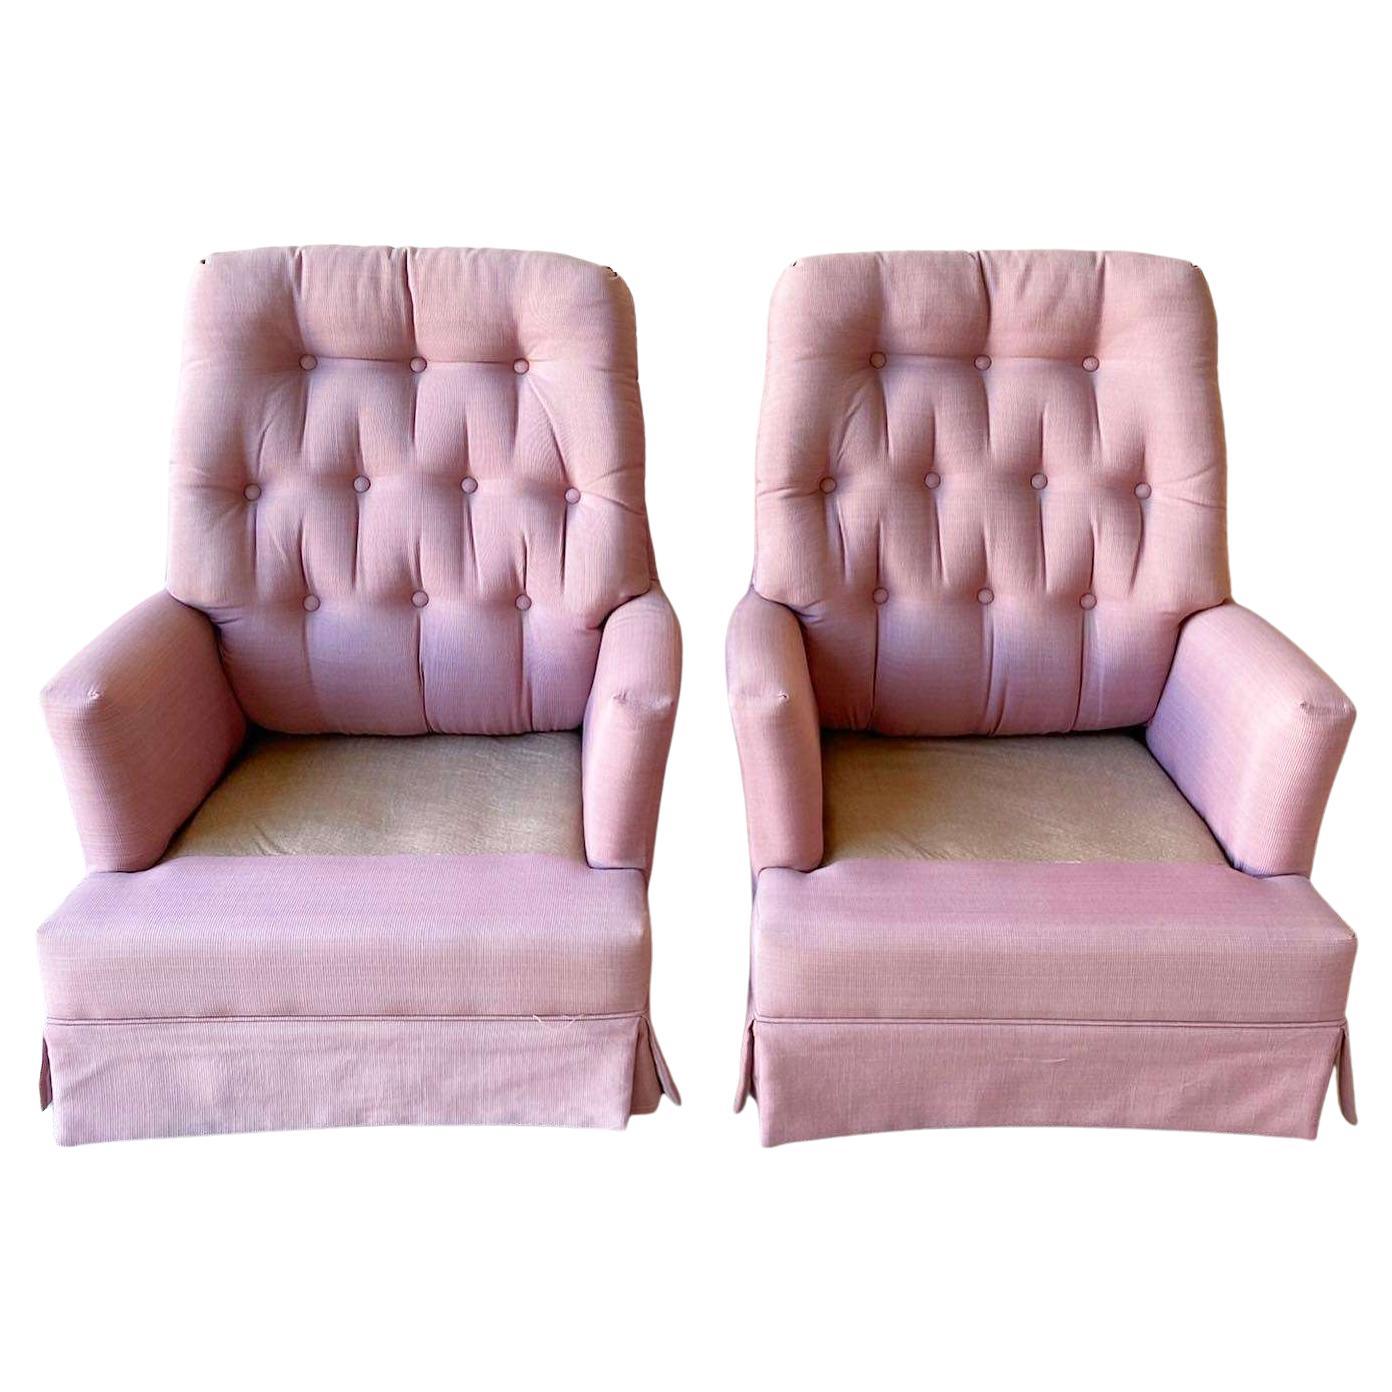 Mid Century Modern Pink Tufted Swivel Chairs For Sale